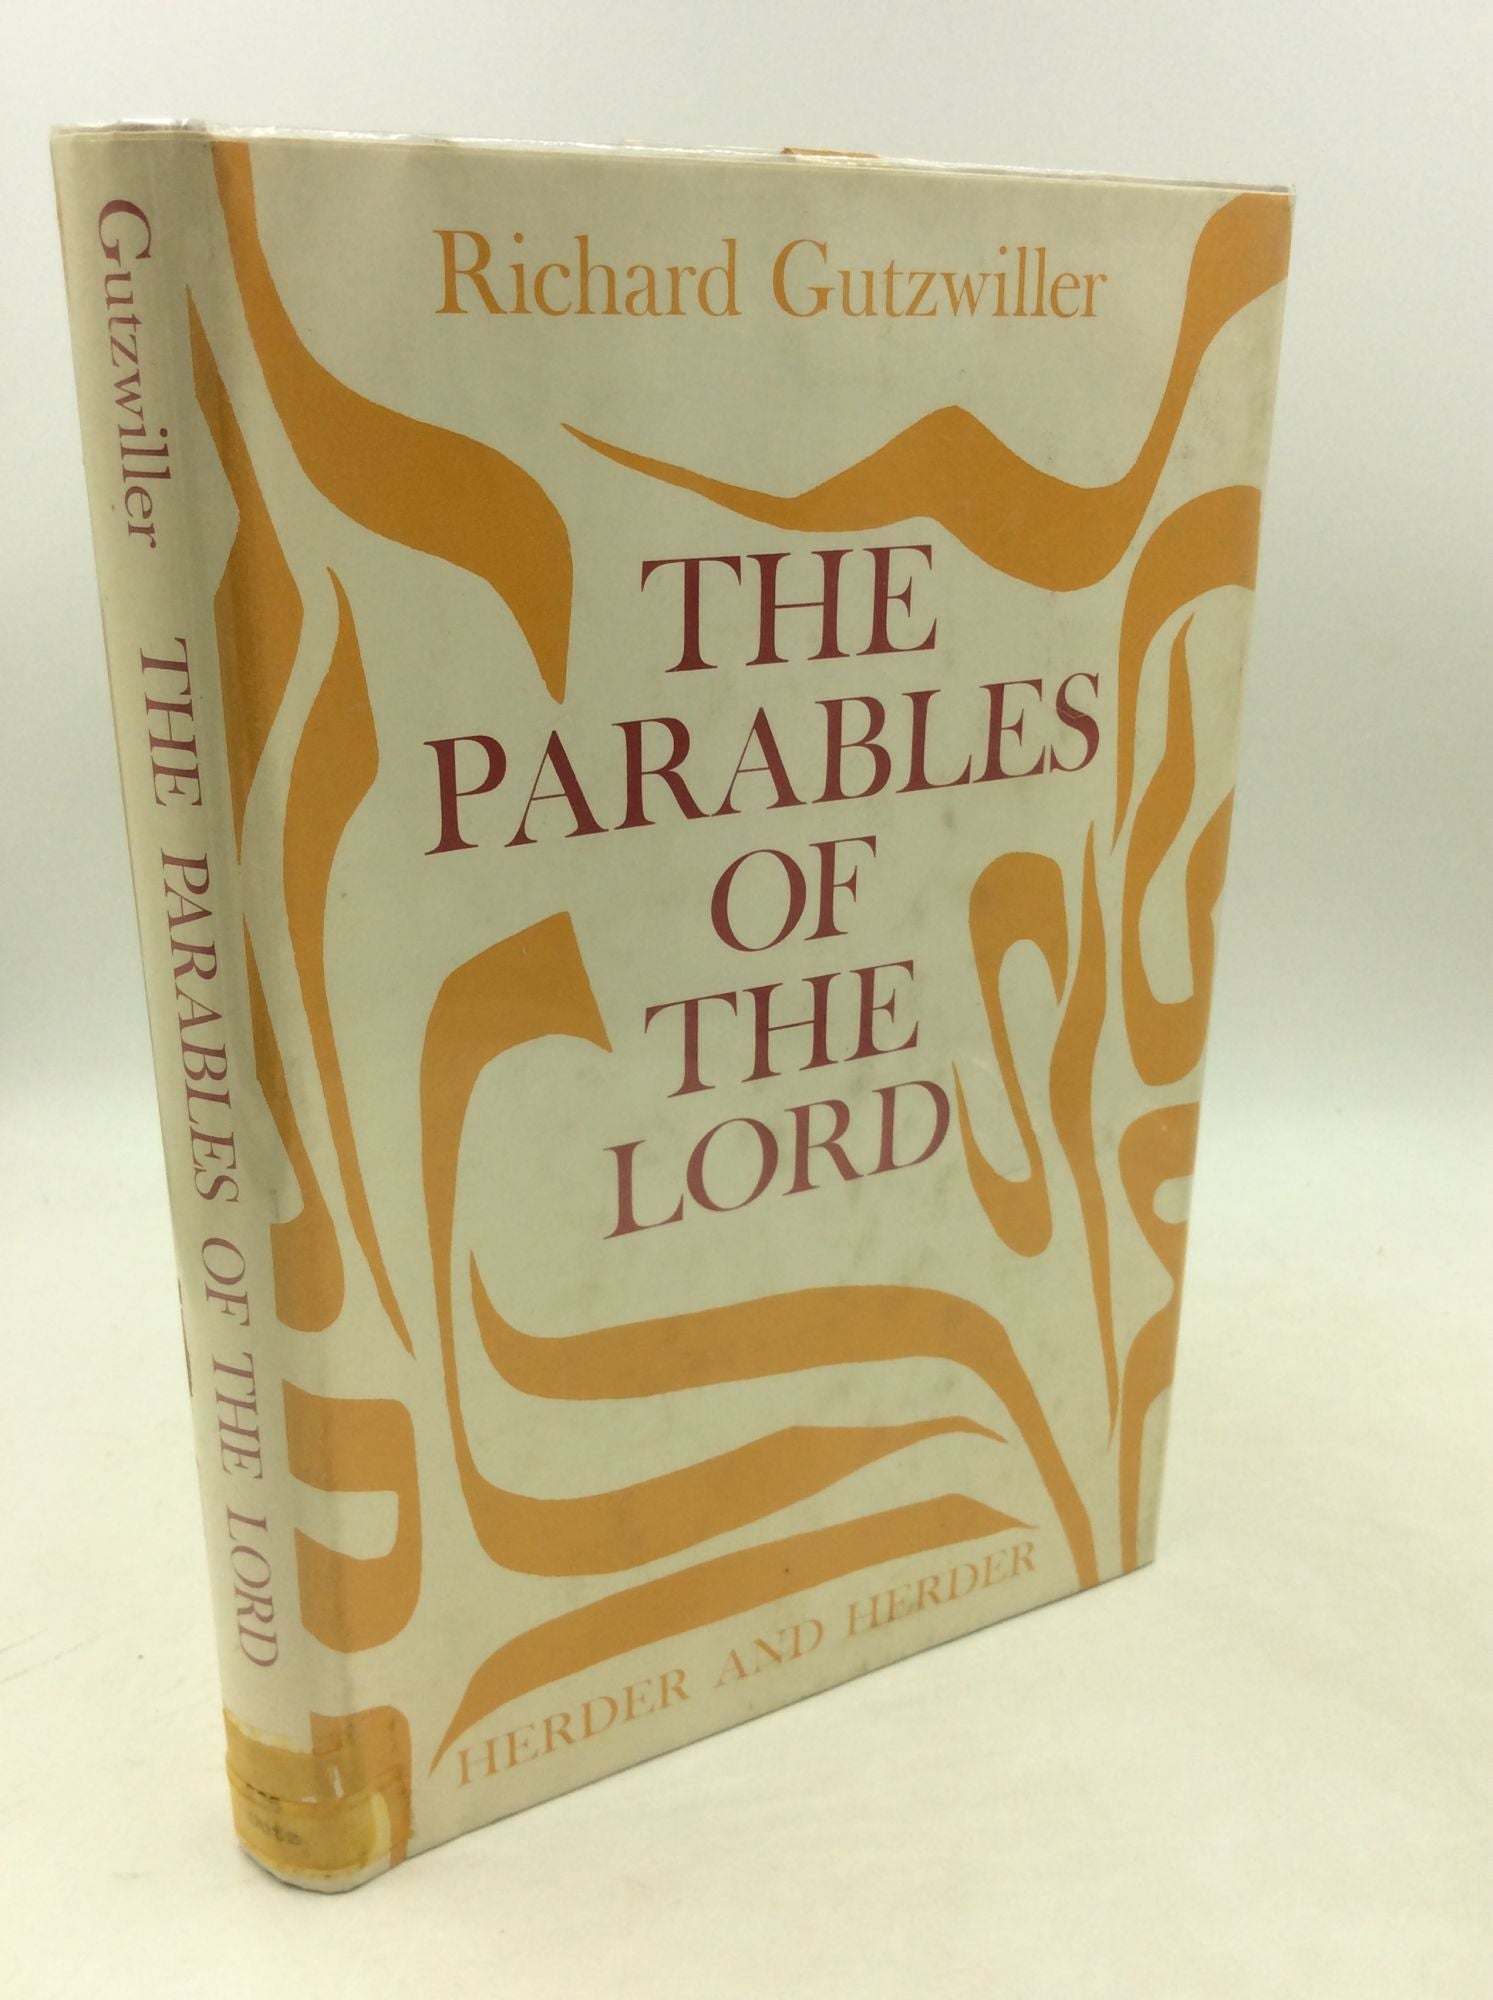 Richard Gutzwiller - The Parables of the Lord